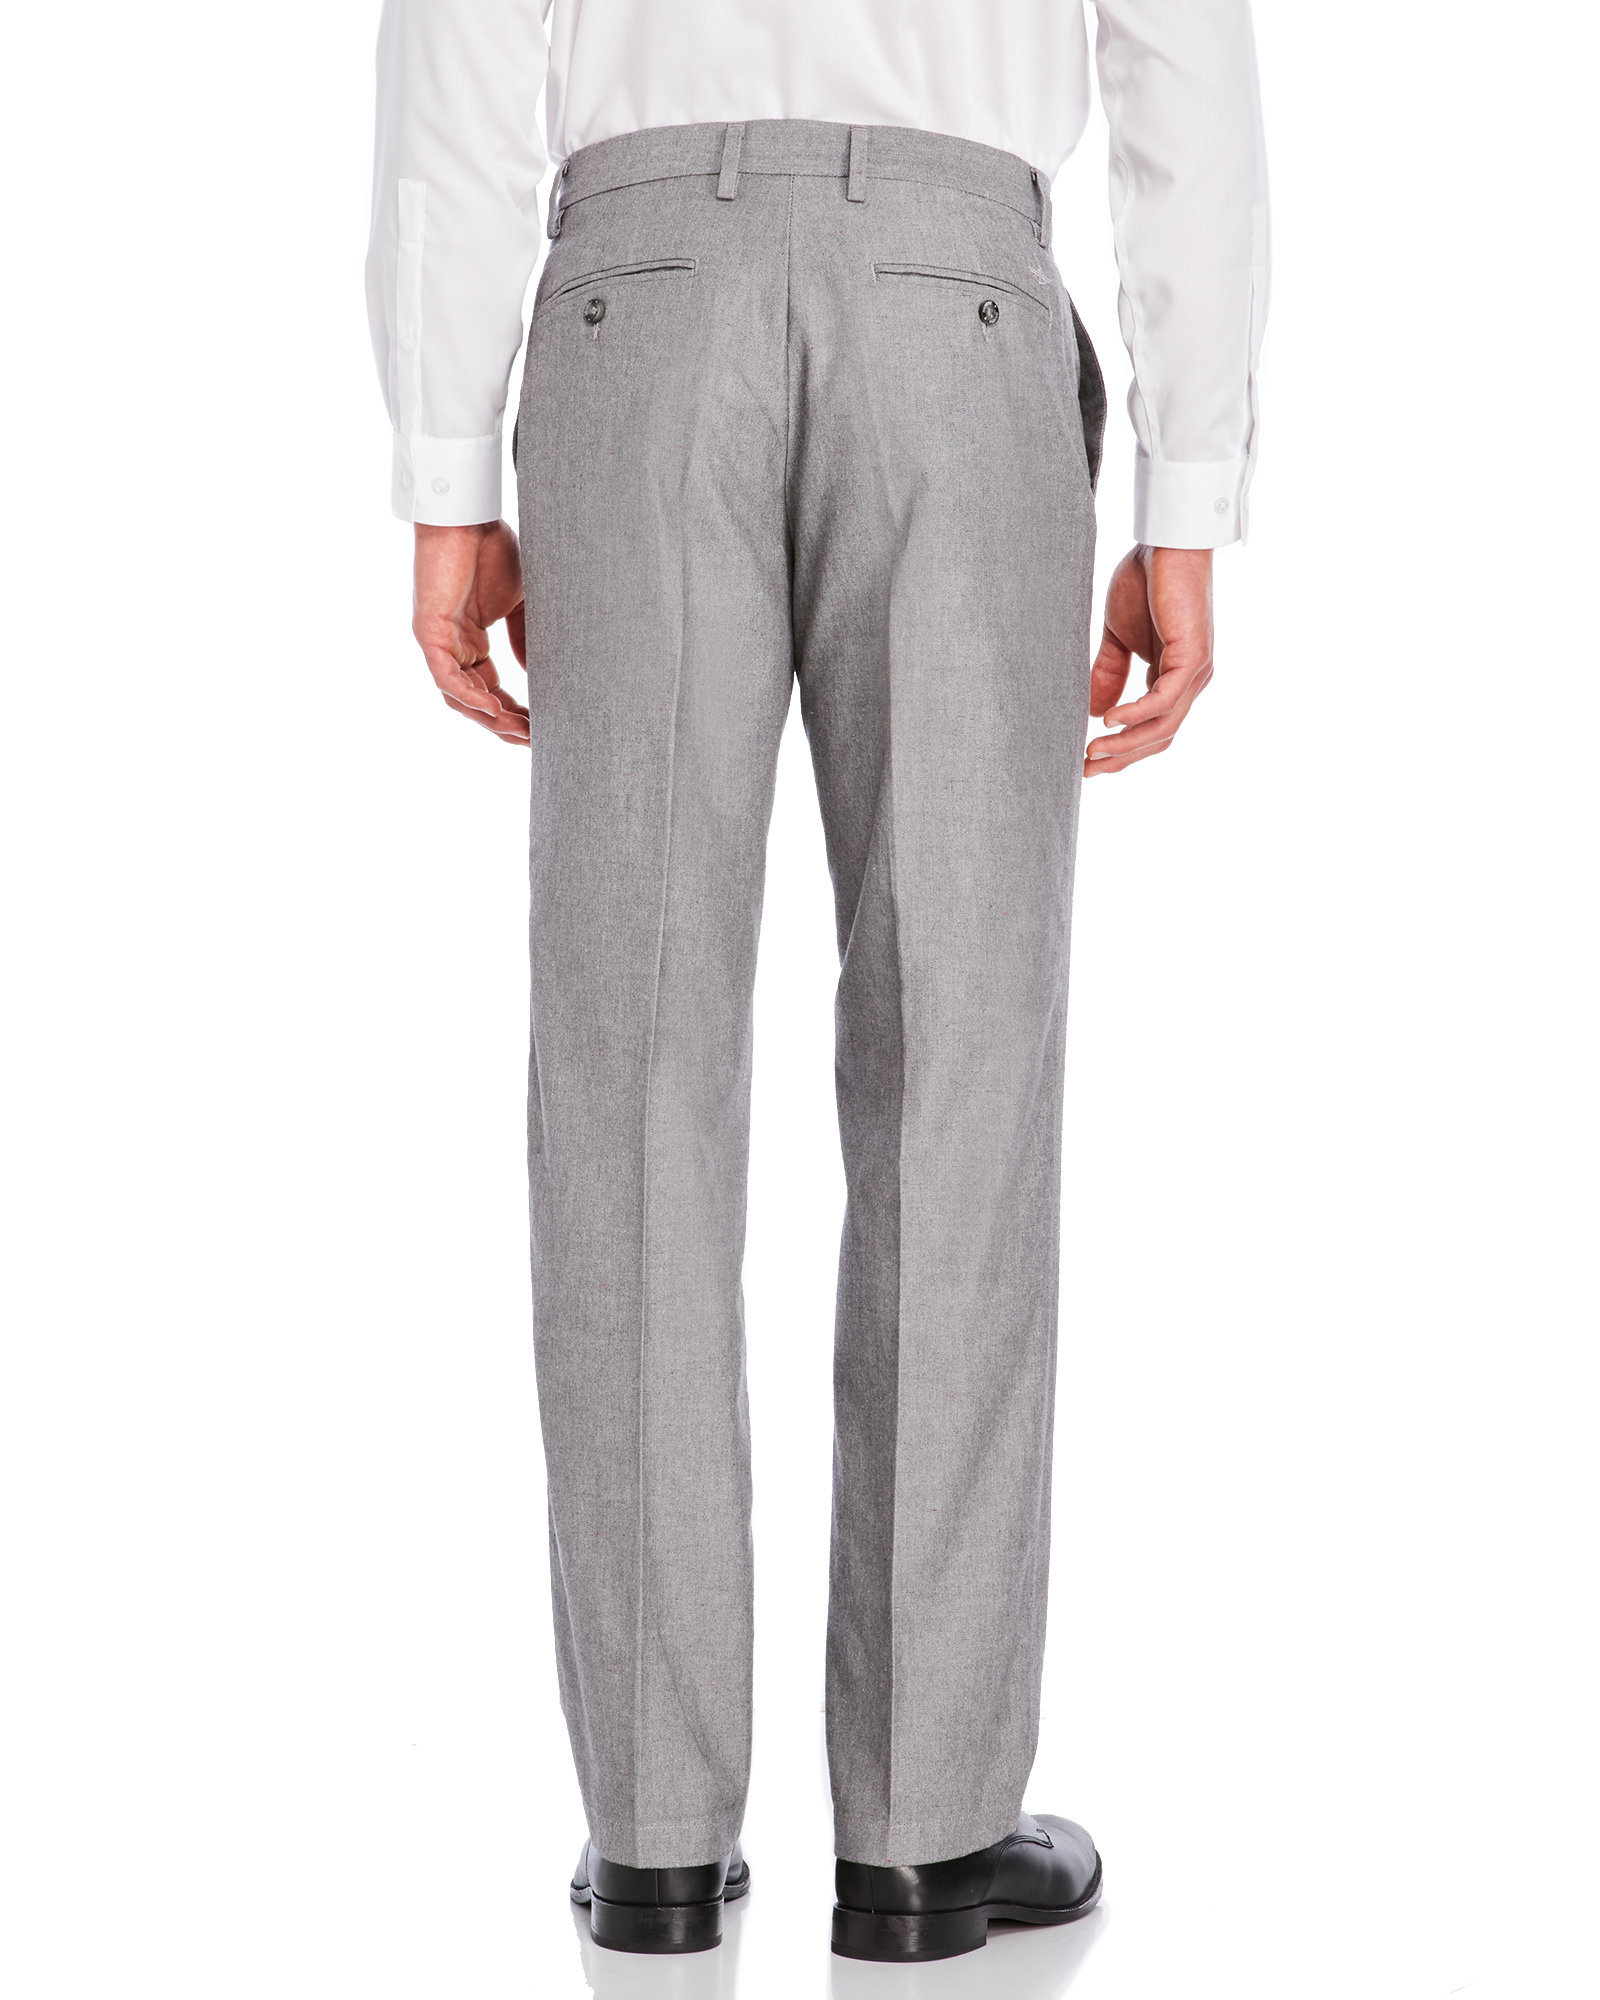 Lyst - Dockers Signature Flat Front Straight Pants in Gray for Men